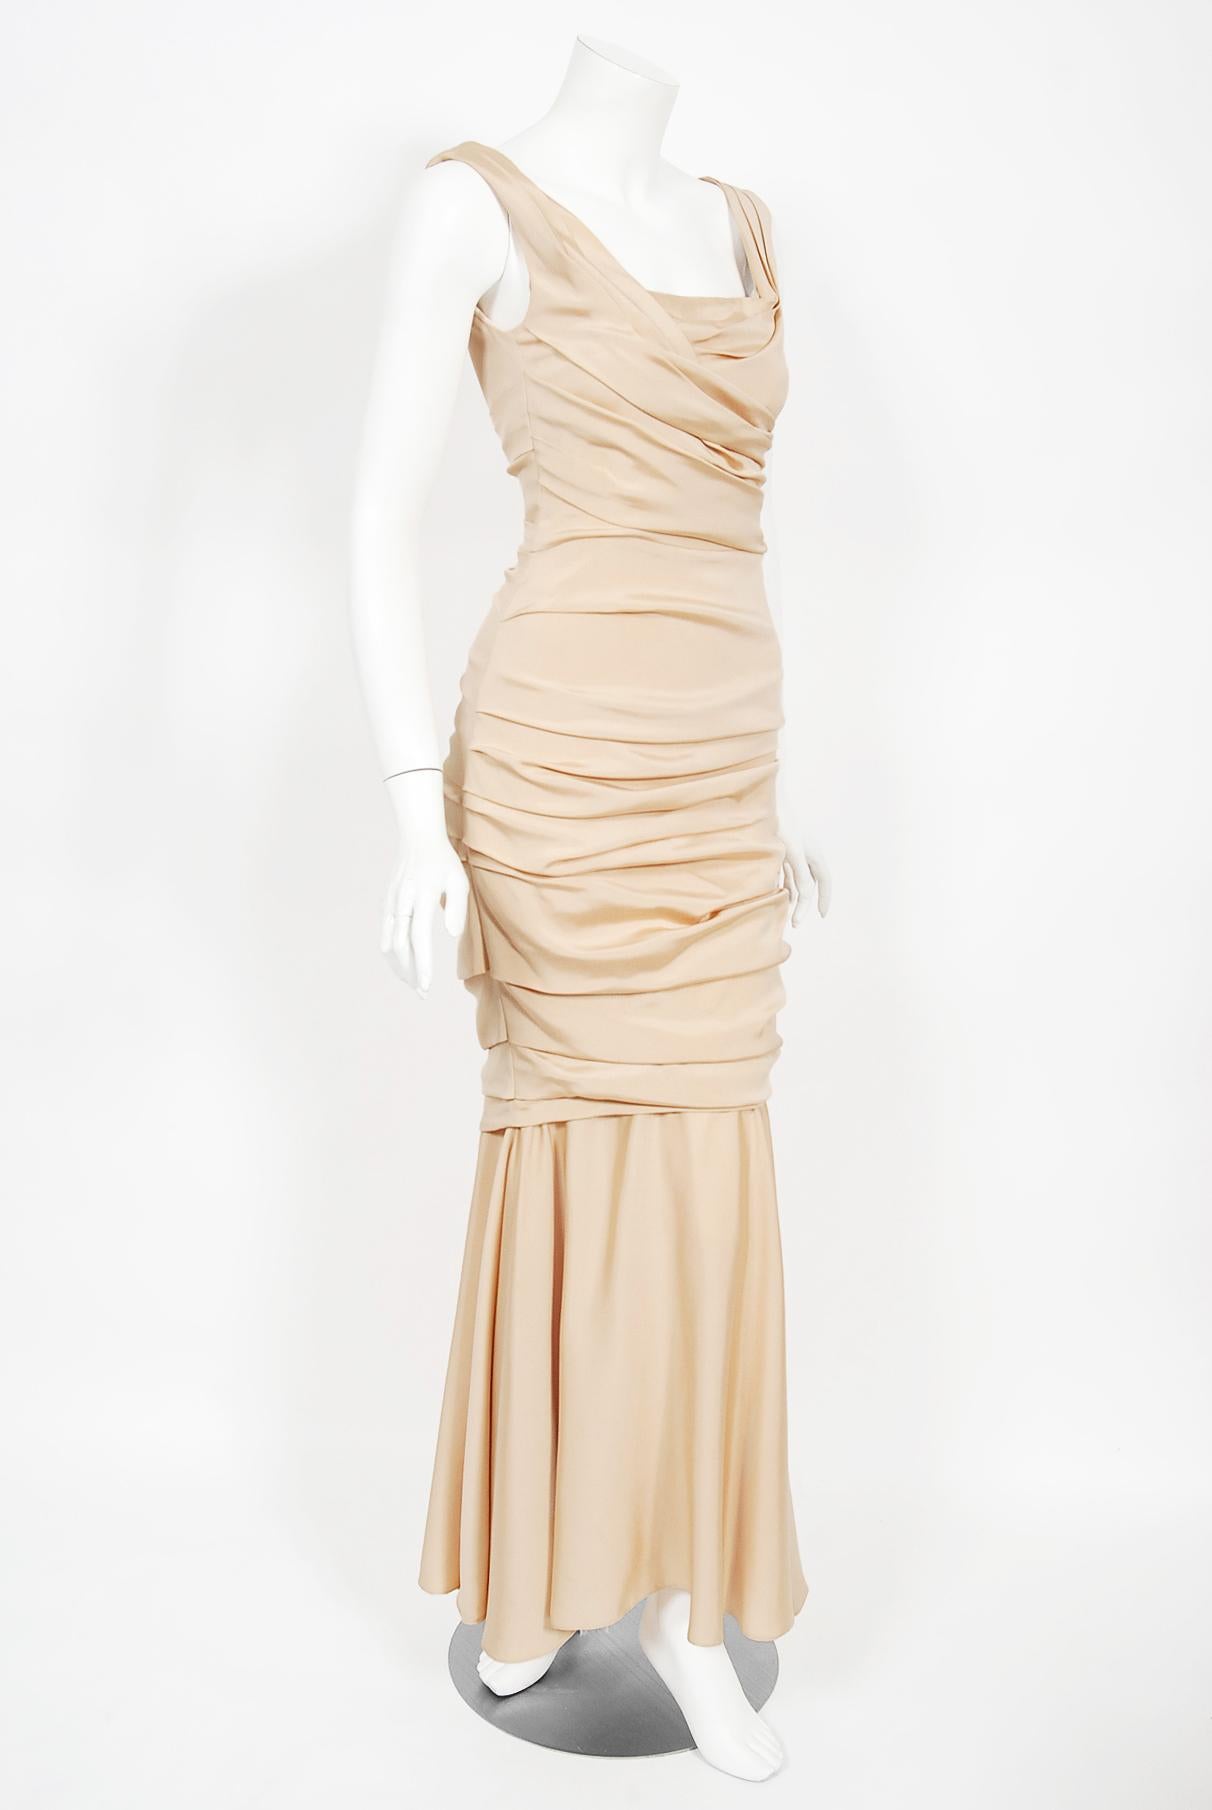 Women's Vintage 2013 Dolce & Gabbana Naked Nude Ruched Stretch Silk Hourglass Gown 